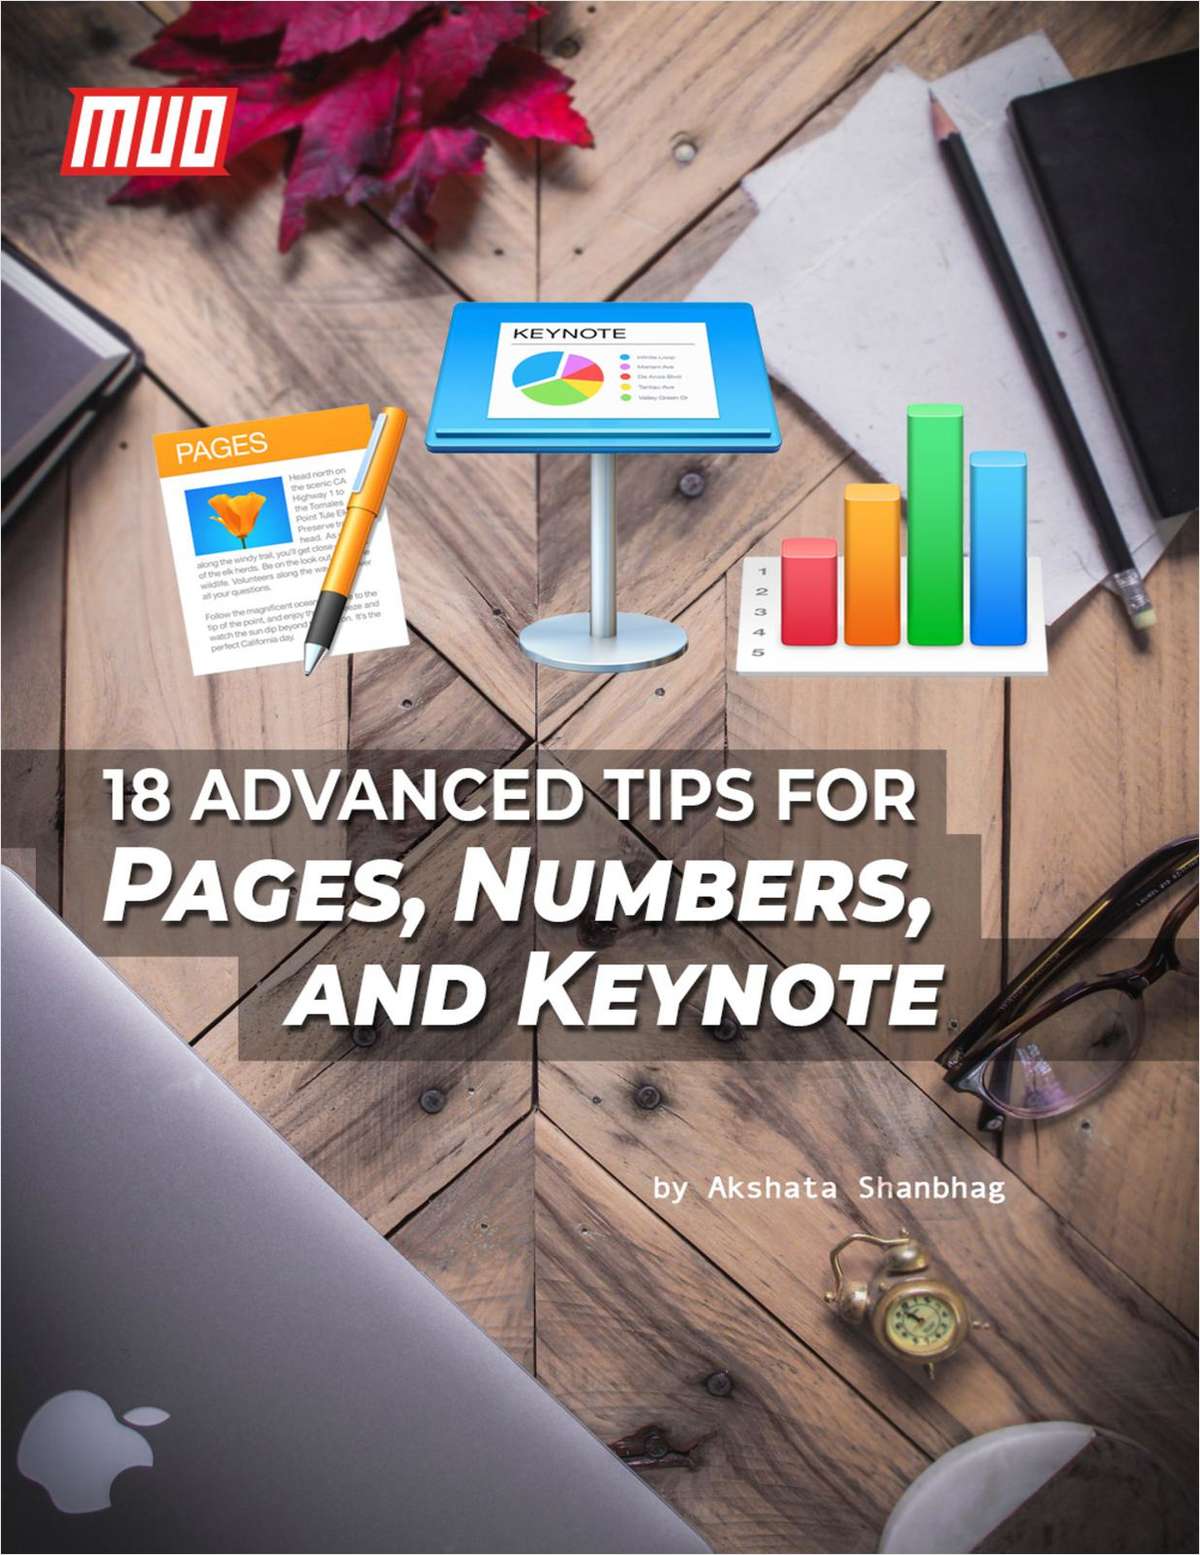 18 Advanced Tips for Pages, Numbers, and Keynote